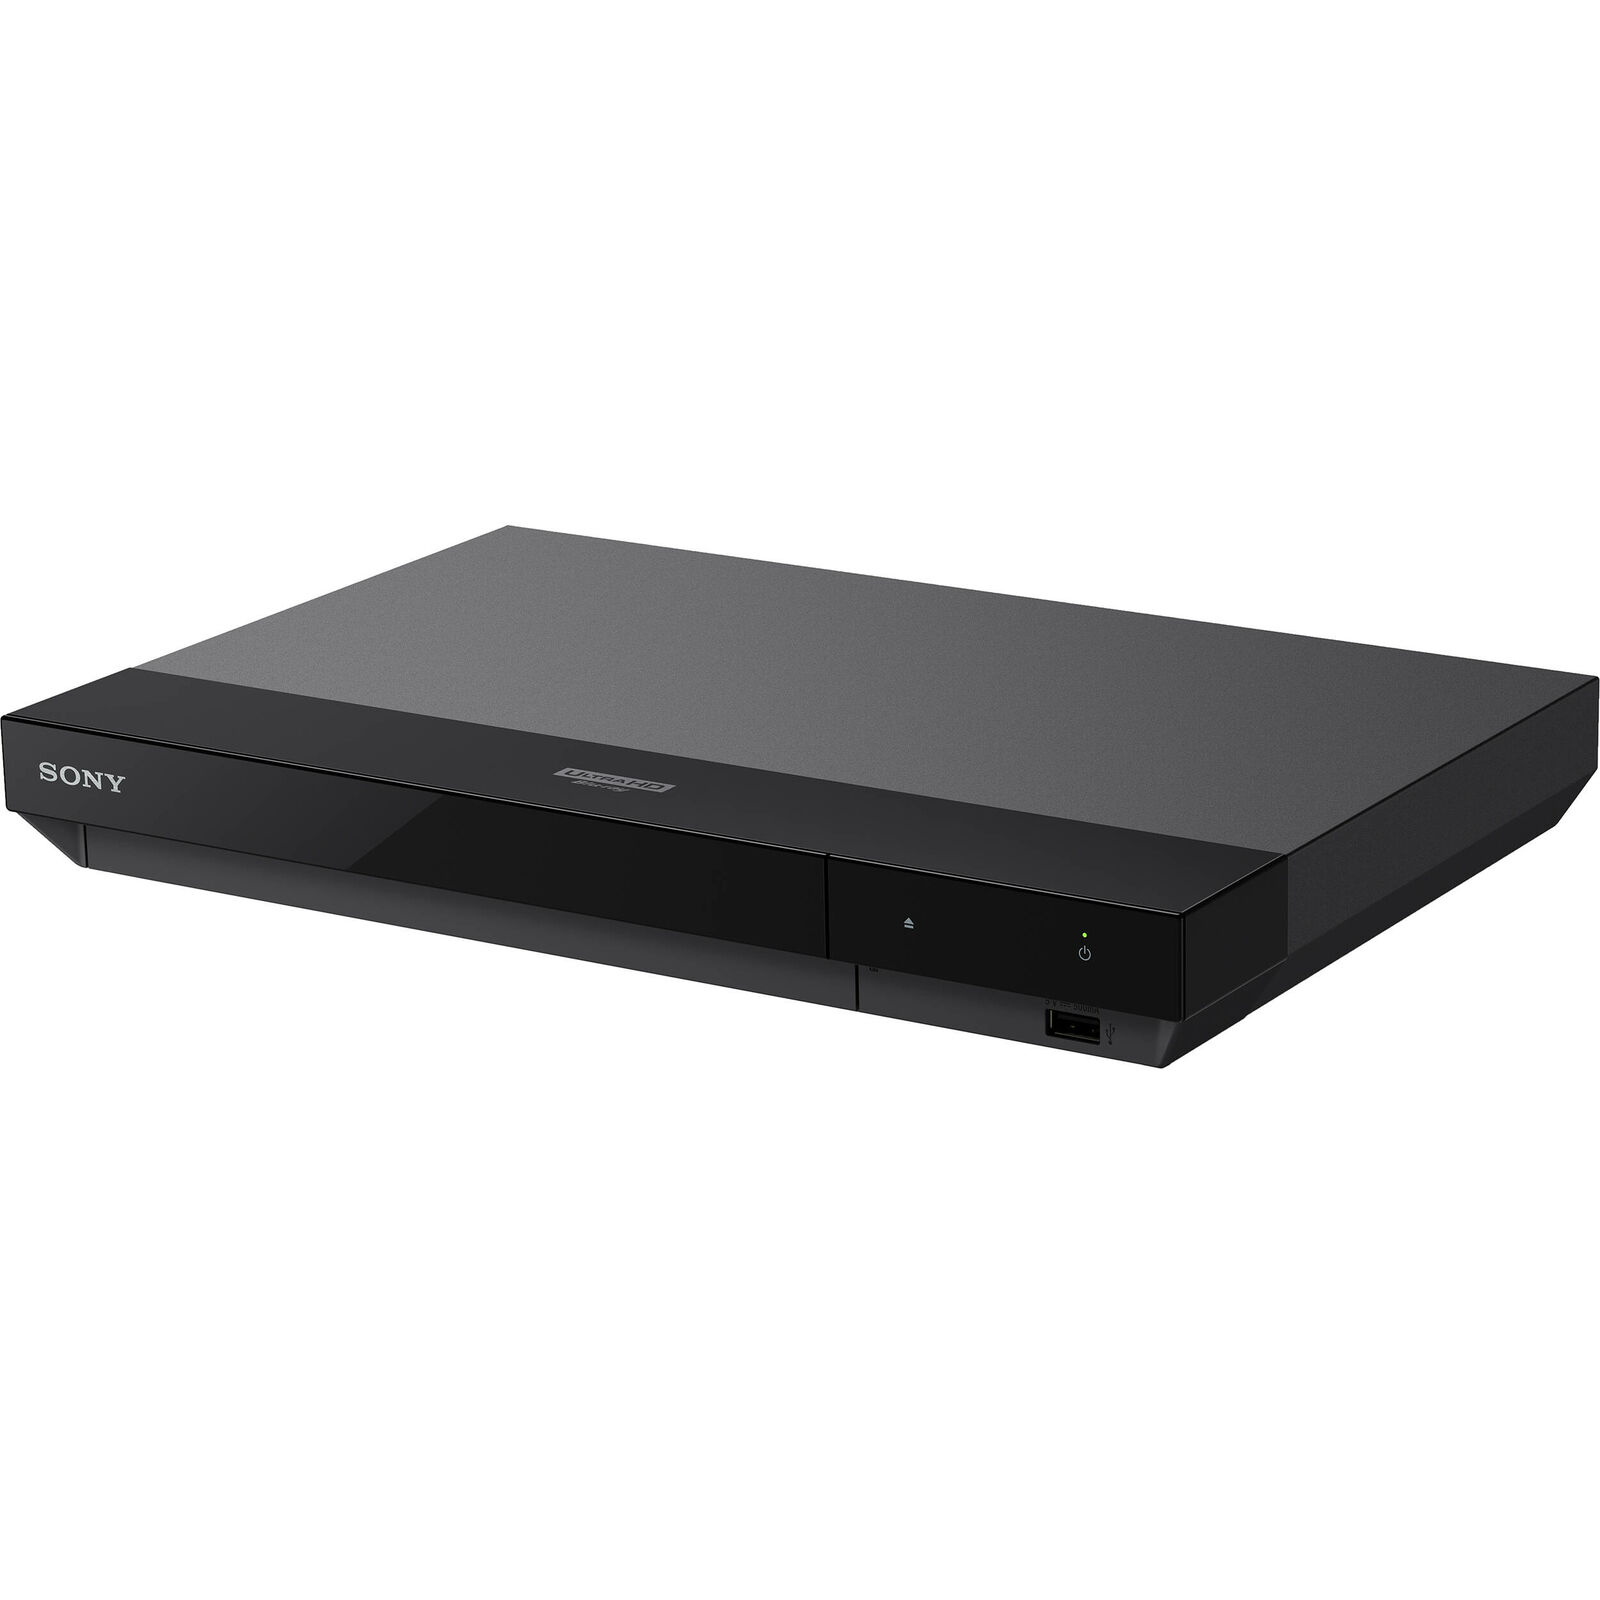 Sony UBP-X700M 4K Ultra HD Smart Blu-ray Player with Wi-Fi for Streaming Video